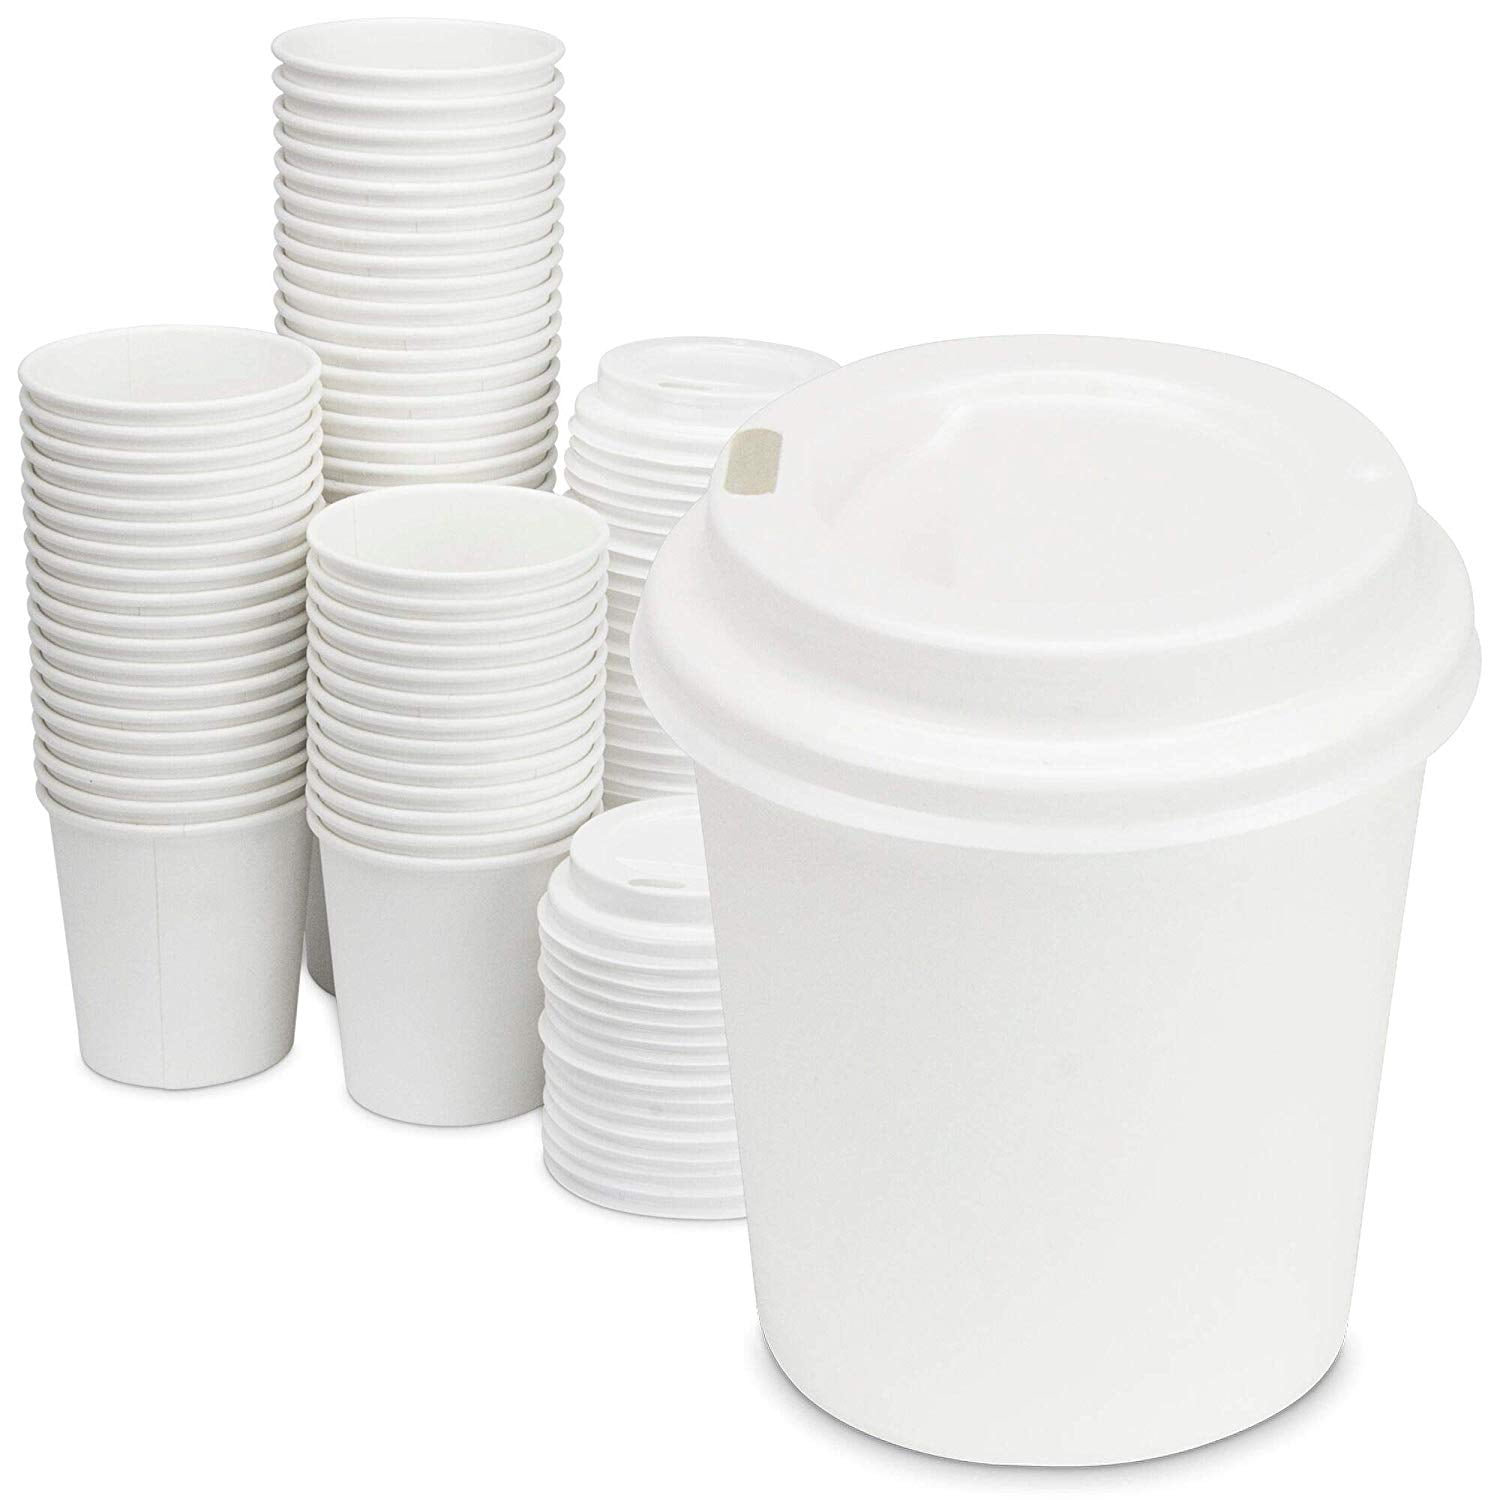 SINGLE WALL WHITE PAPER CUPS Disposable 50 x 8/12/16/20 for Hot/Cold Drinks Lids 